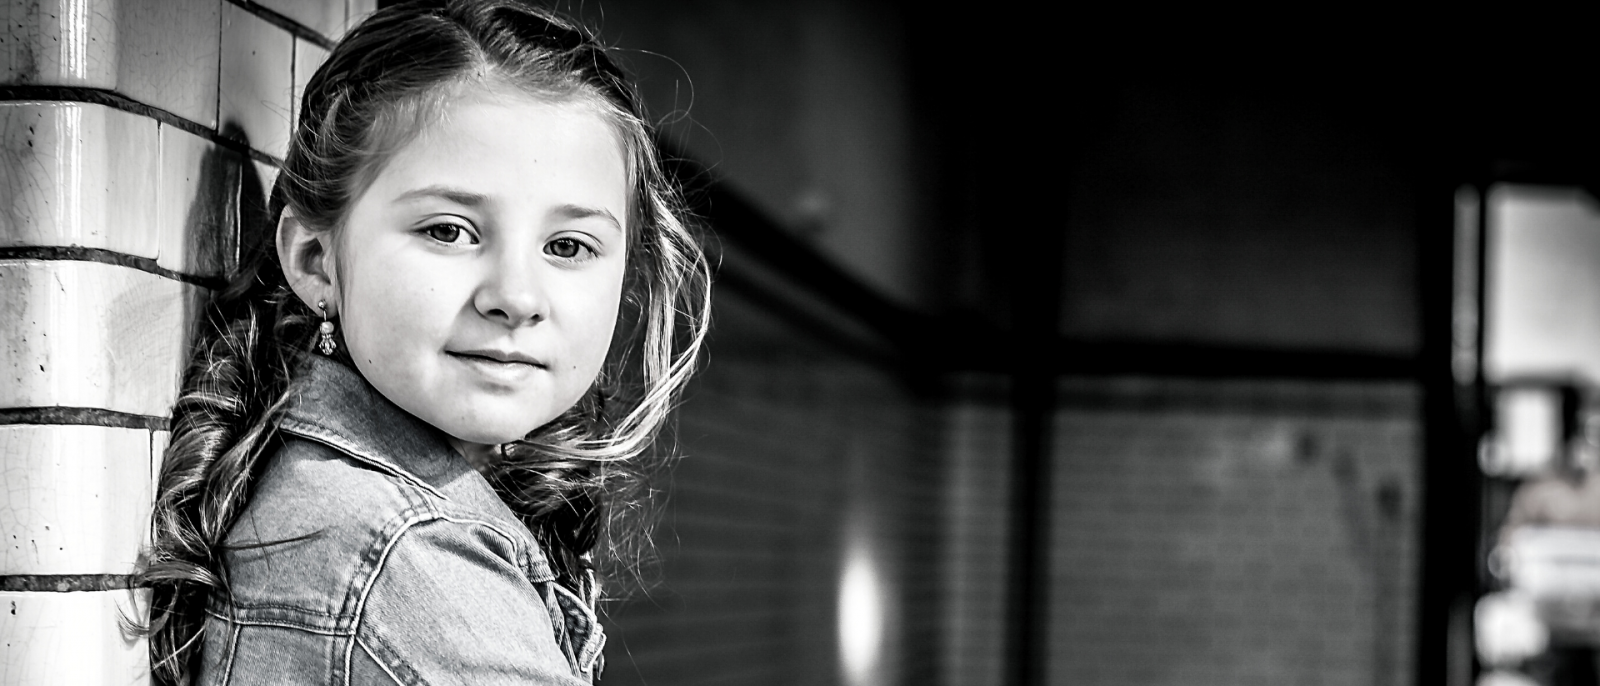 black and white photo of young girl leaning against a brick wall